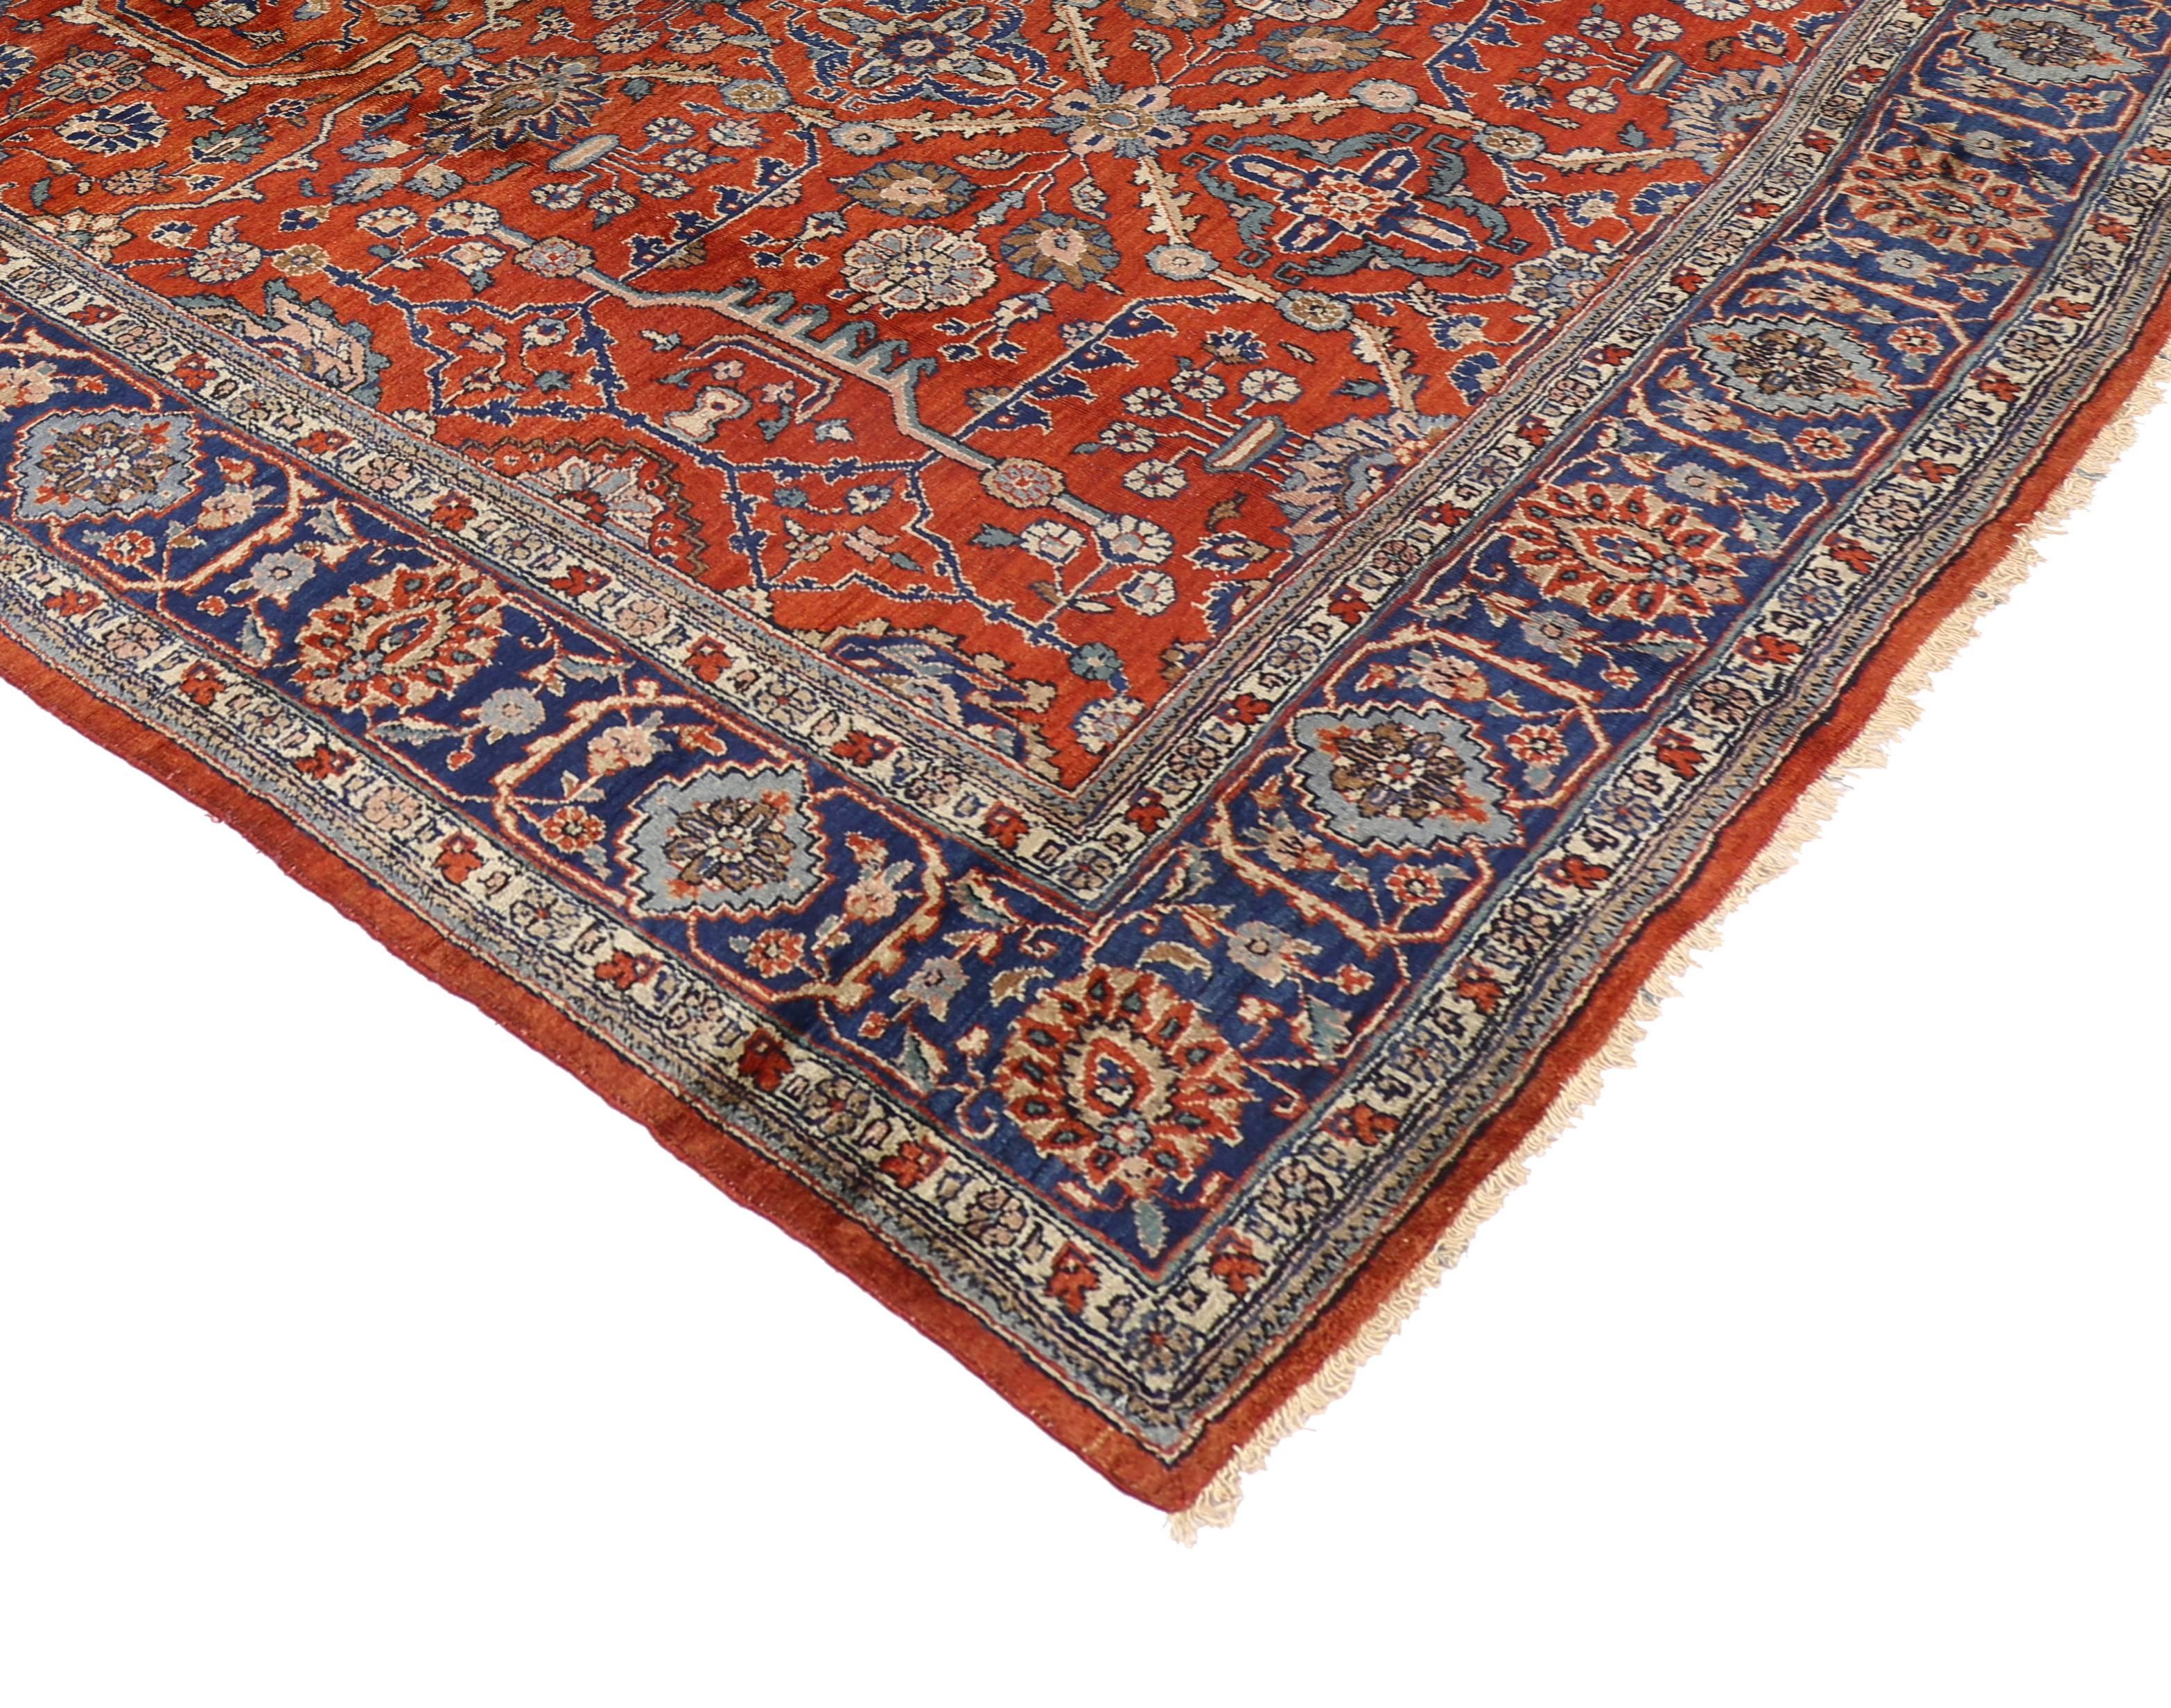 20th Century Antique Persian Mahal Rug with Traditional Style